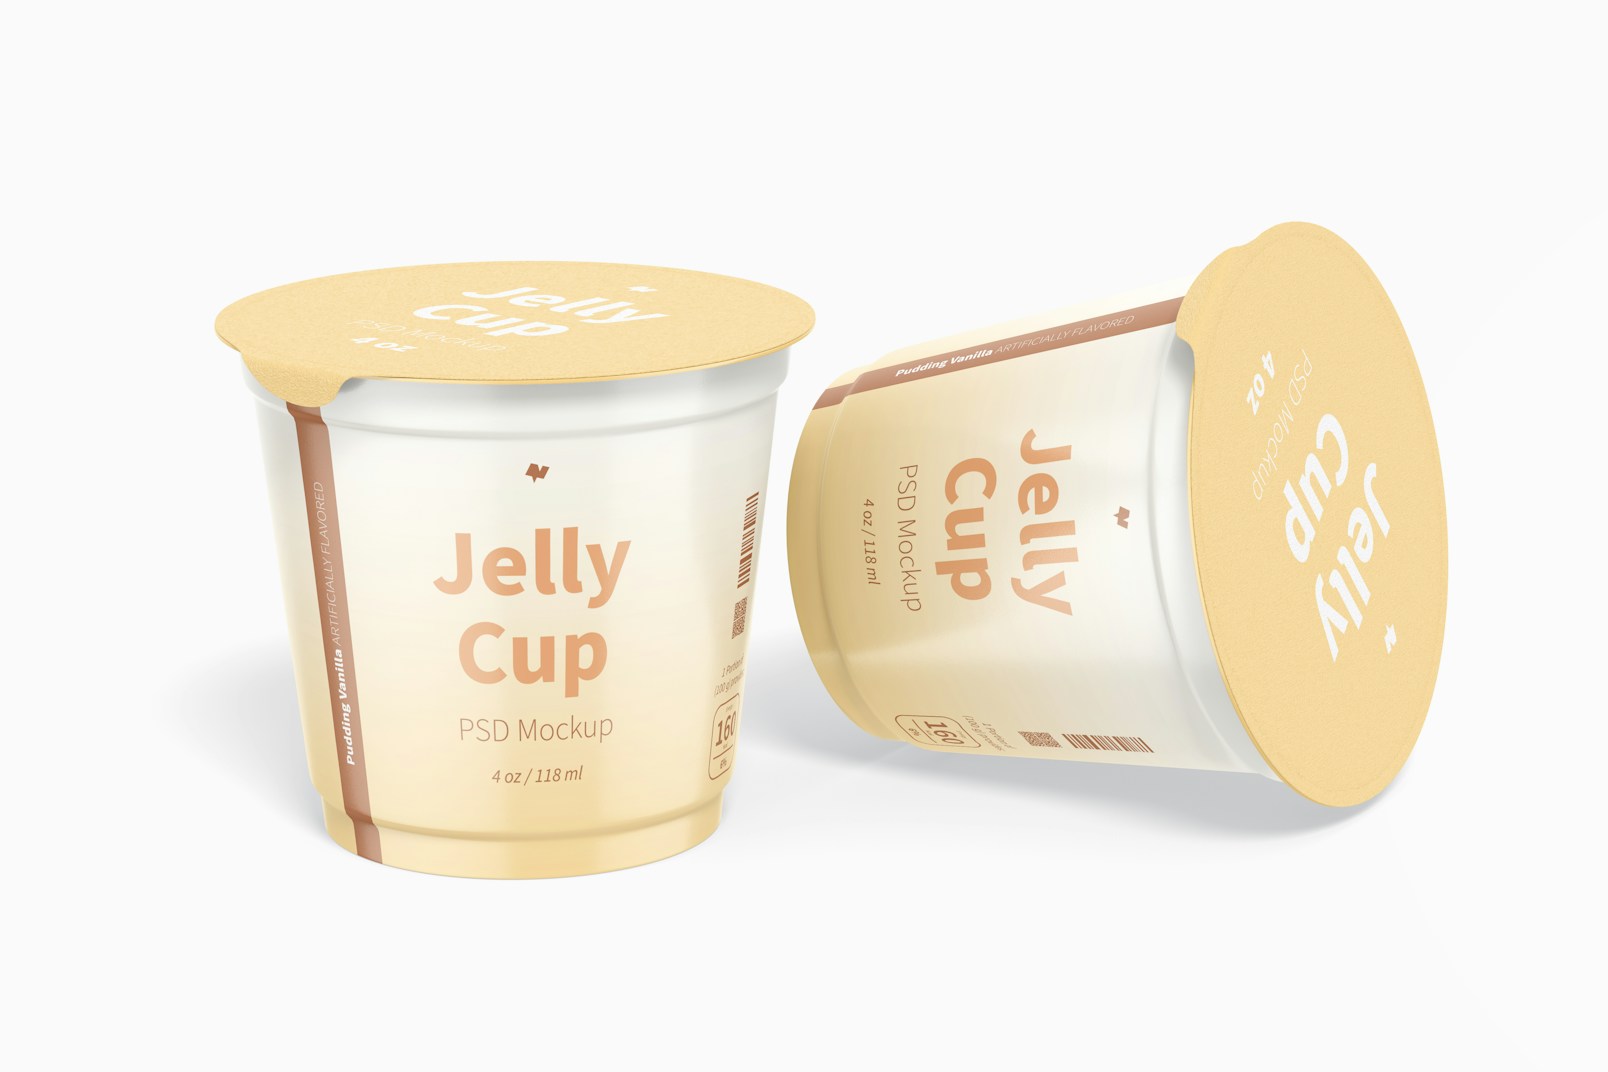 4 Oz Jelly Cups Mockup, Standing and Dropped